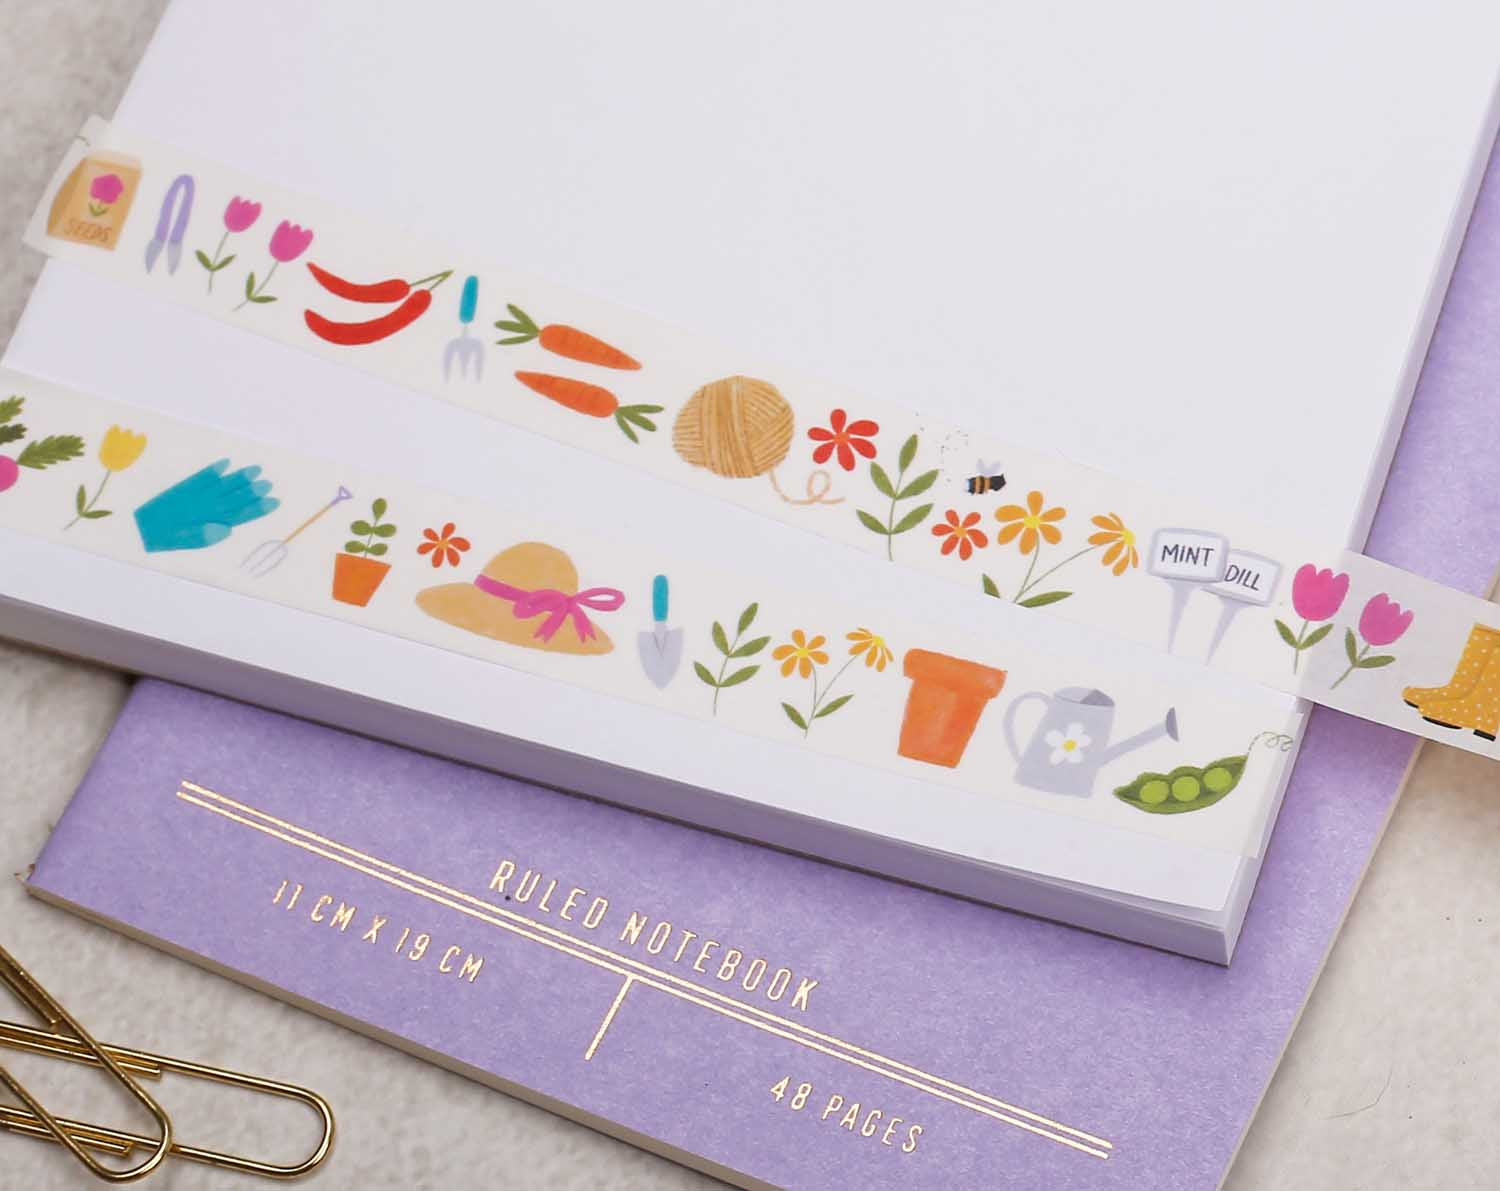 premium Washi Tape features paintings of cute gardening items